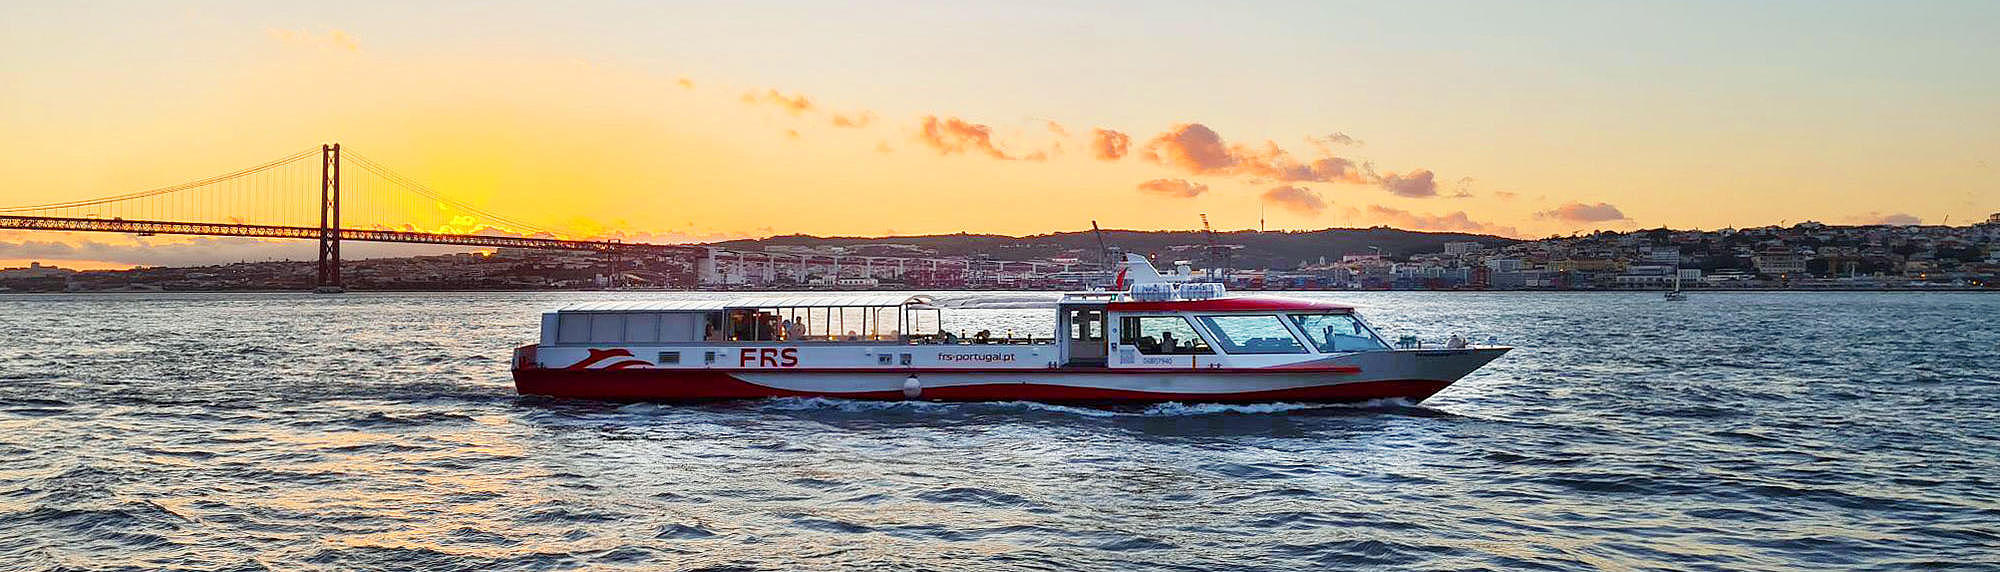 Ferry vessel on the Tagus River at sunset.